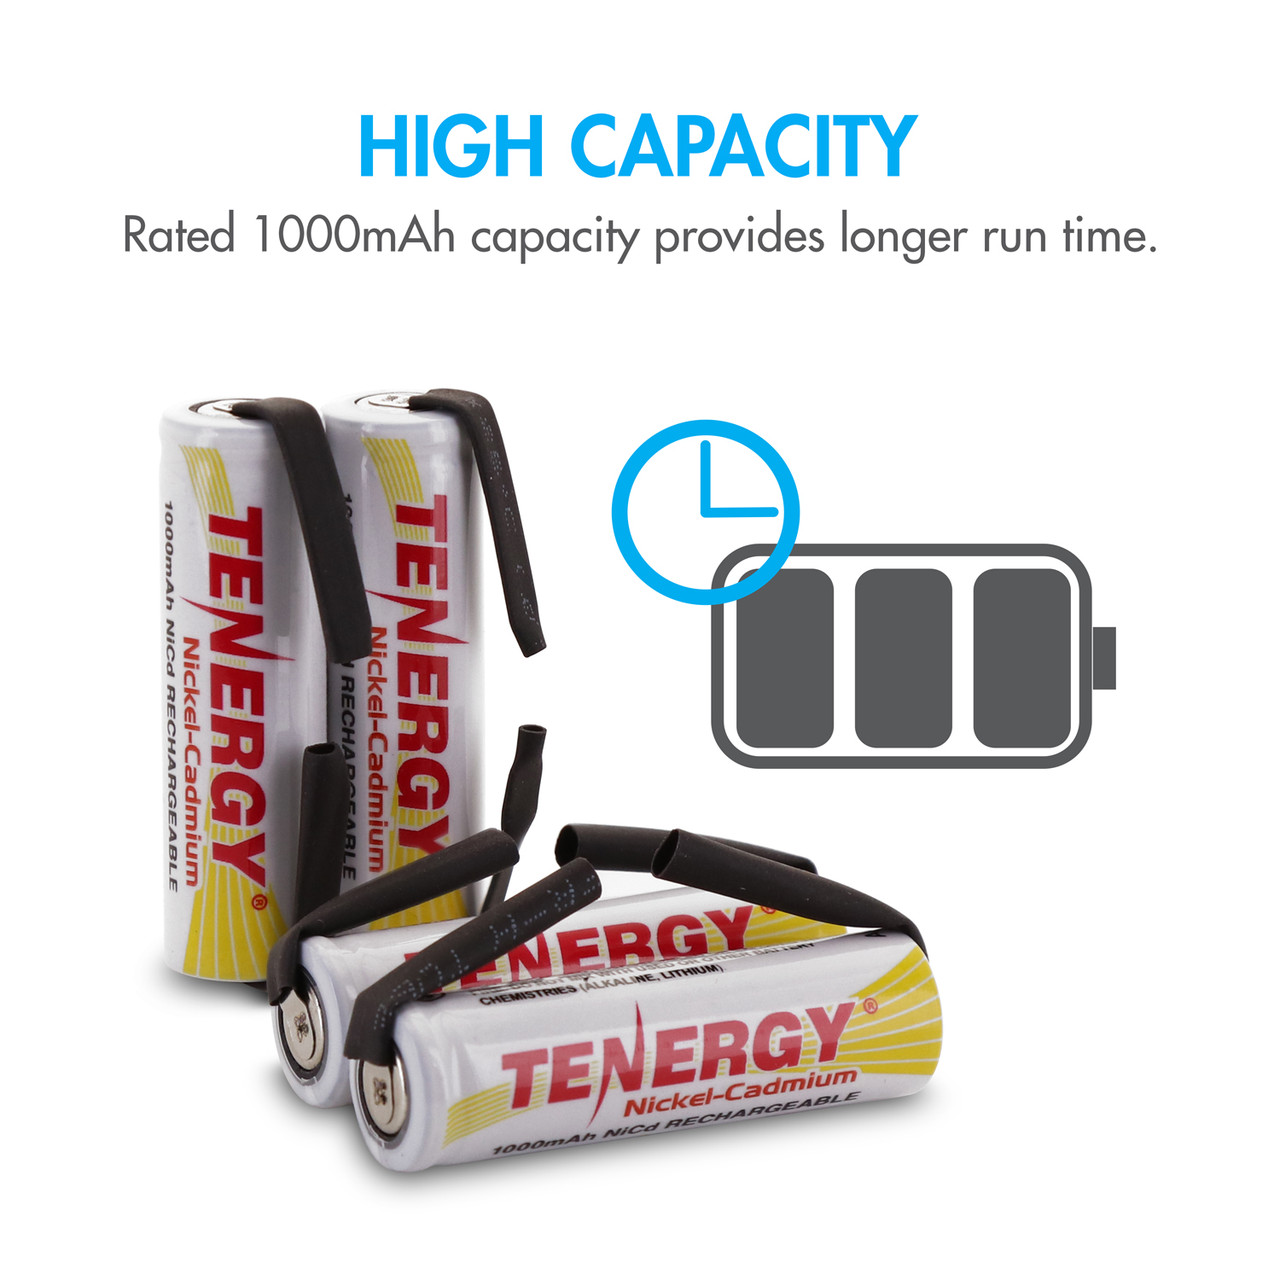 Combo: 12pcs of Tenergy AA 1000mAh NiCd Rechargeable Battery Flat Top with Tabs